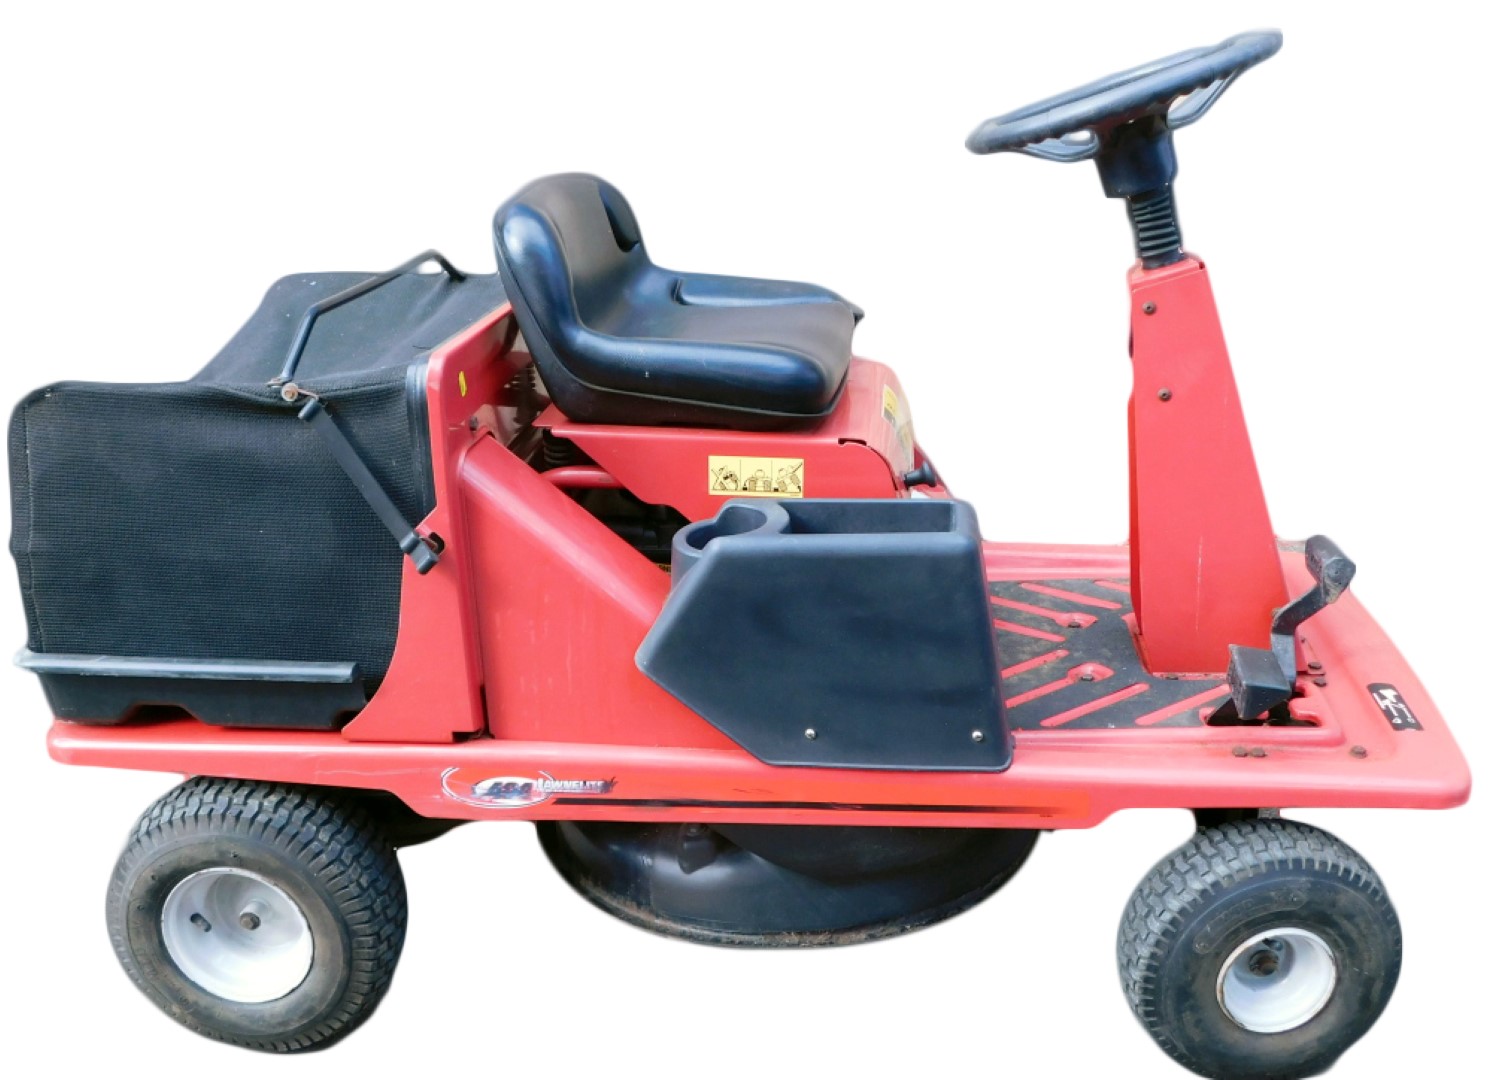 A Lawnflite 404 petrol ride on mower, in red.